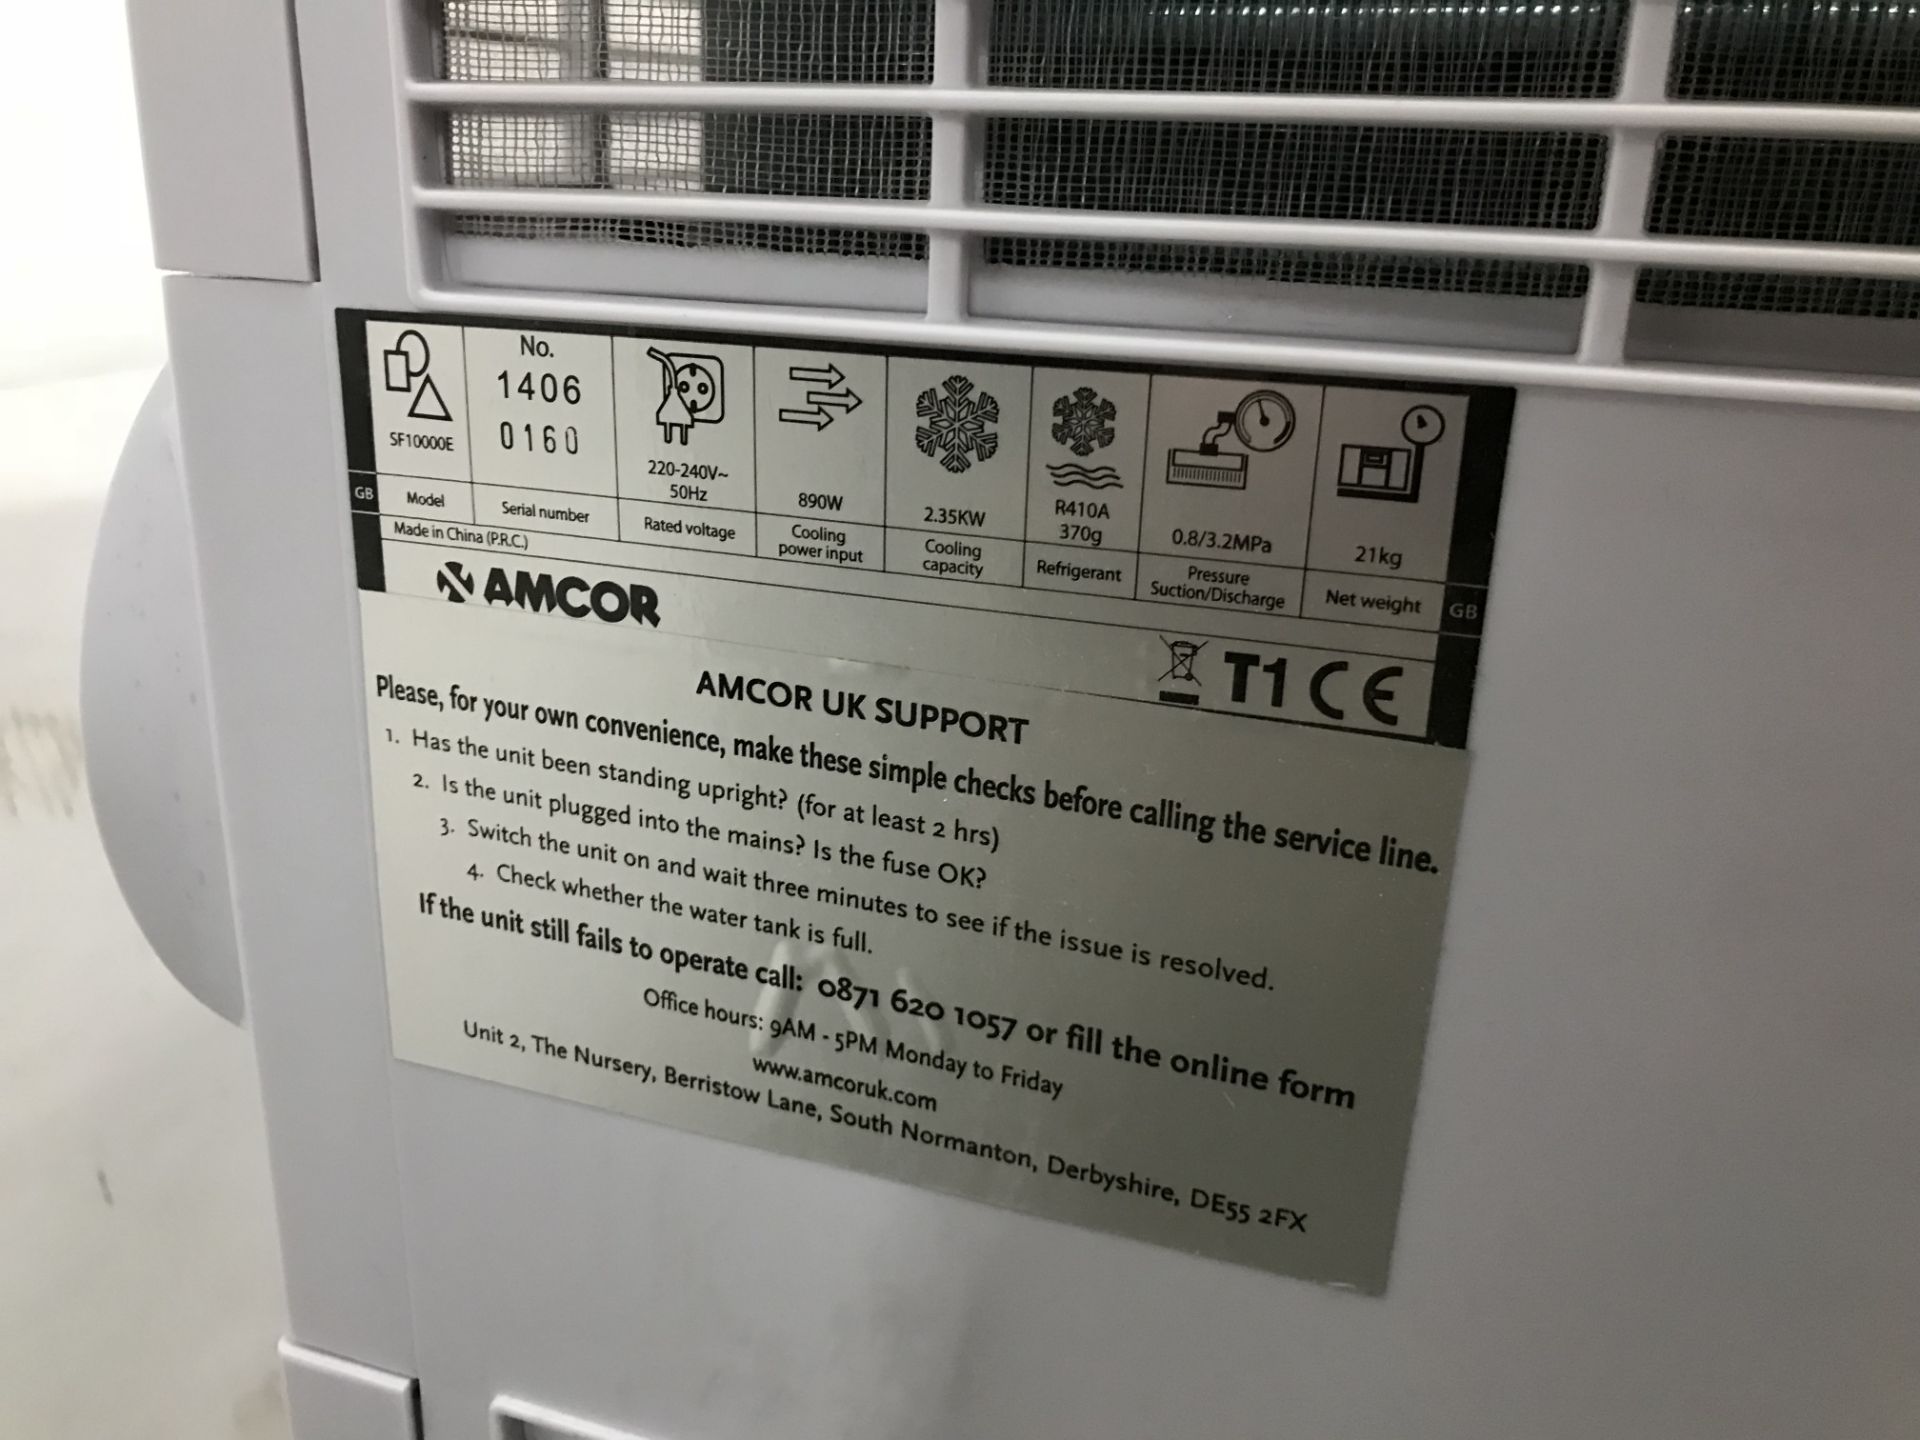 3 x Amcor SF10000E Portable Air Conditioning Units - Image 7 of 7